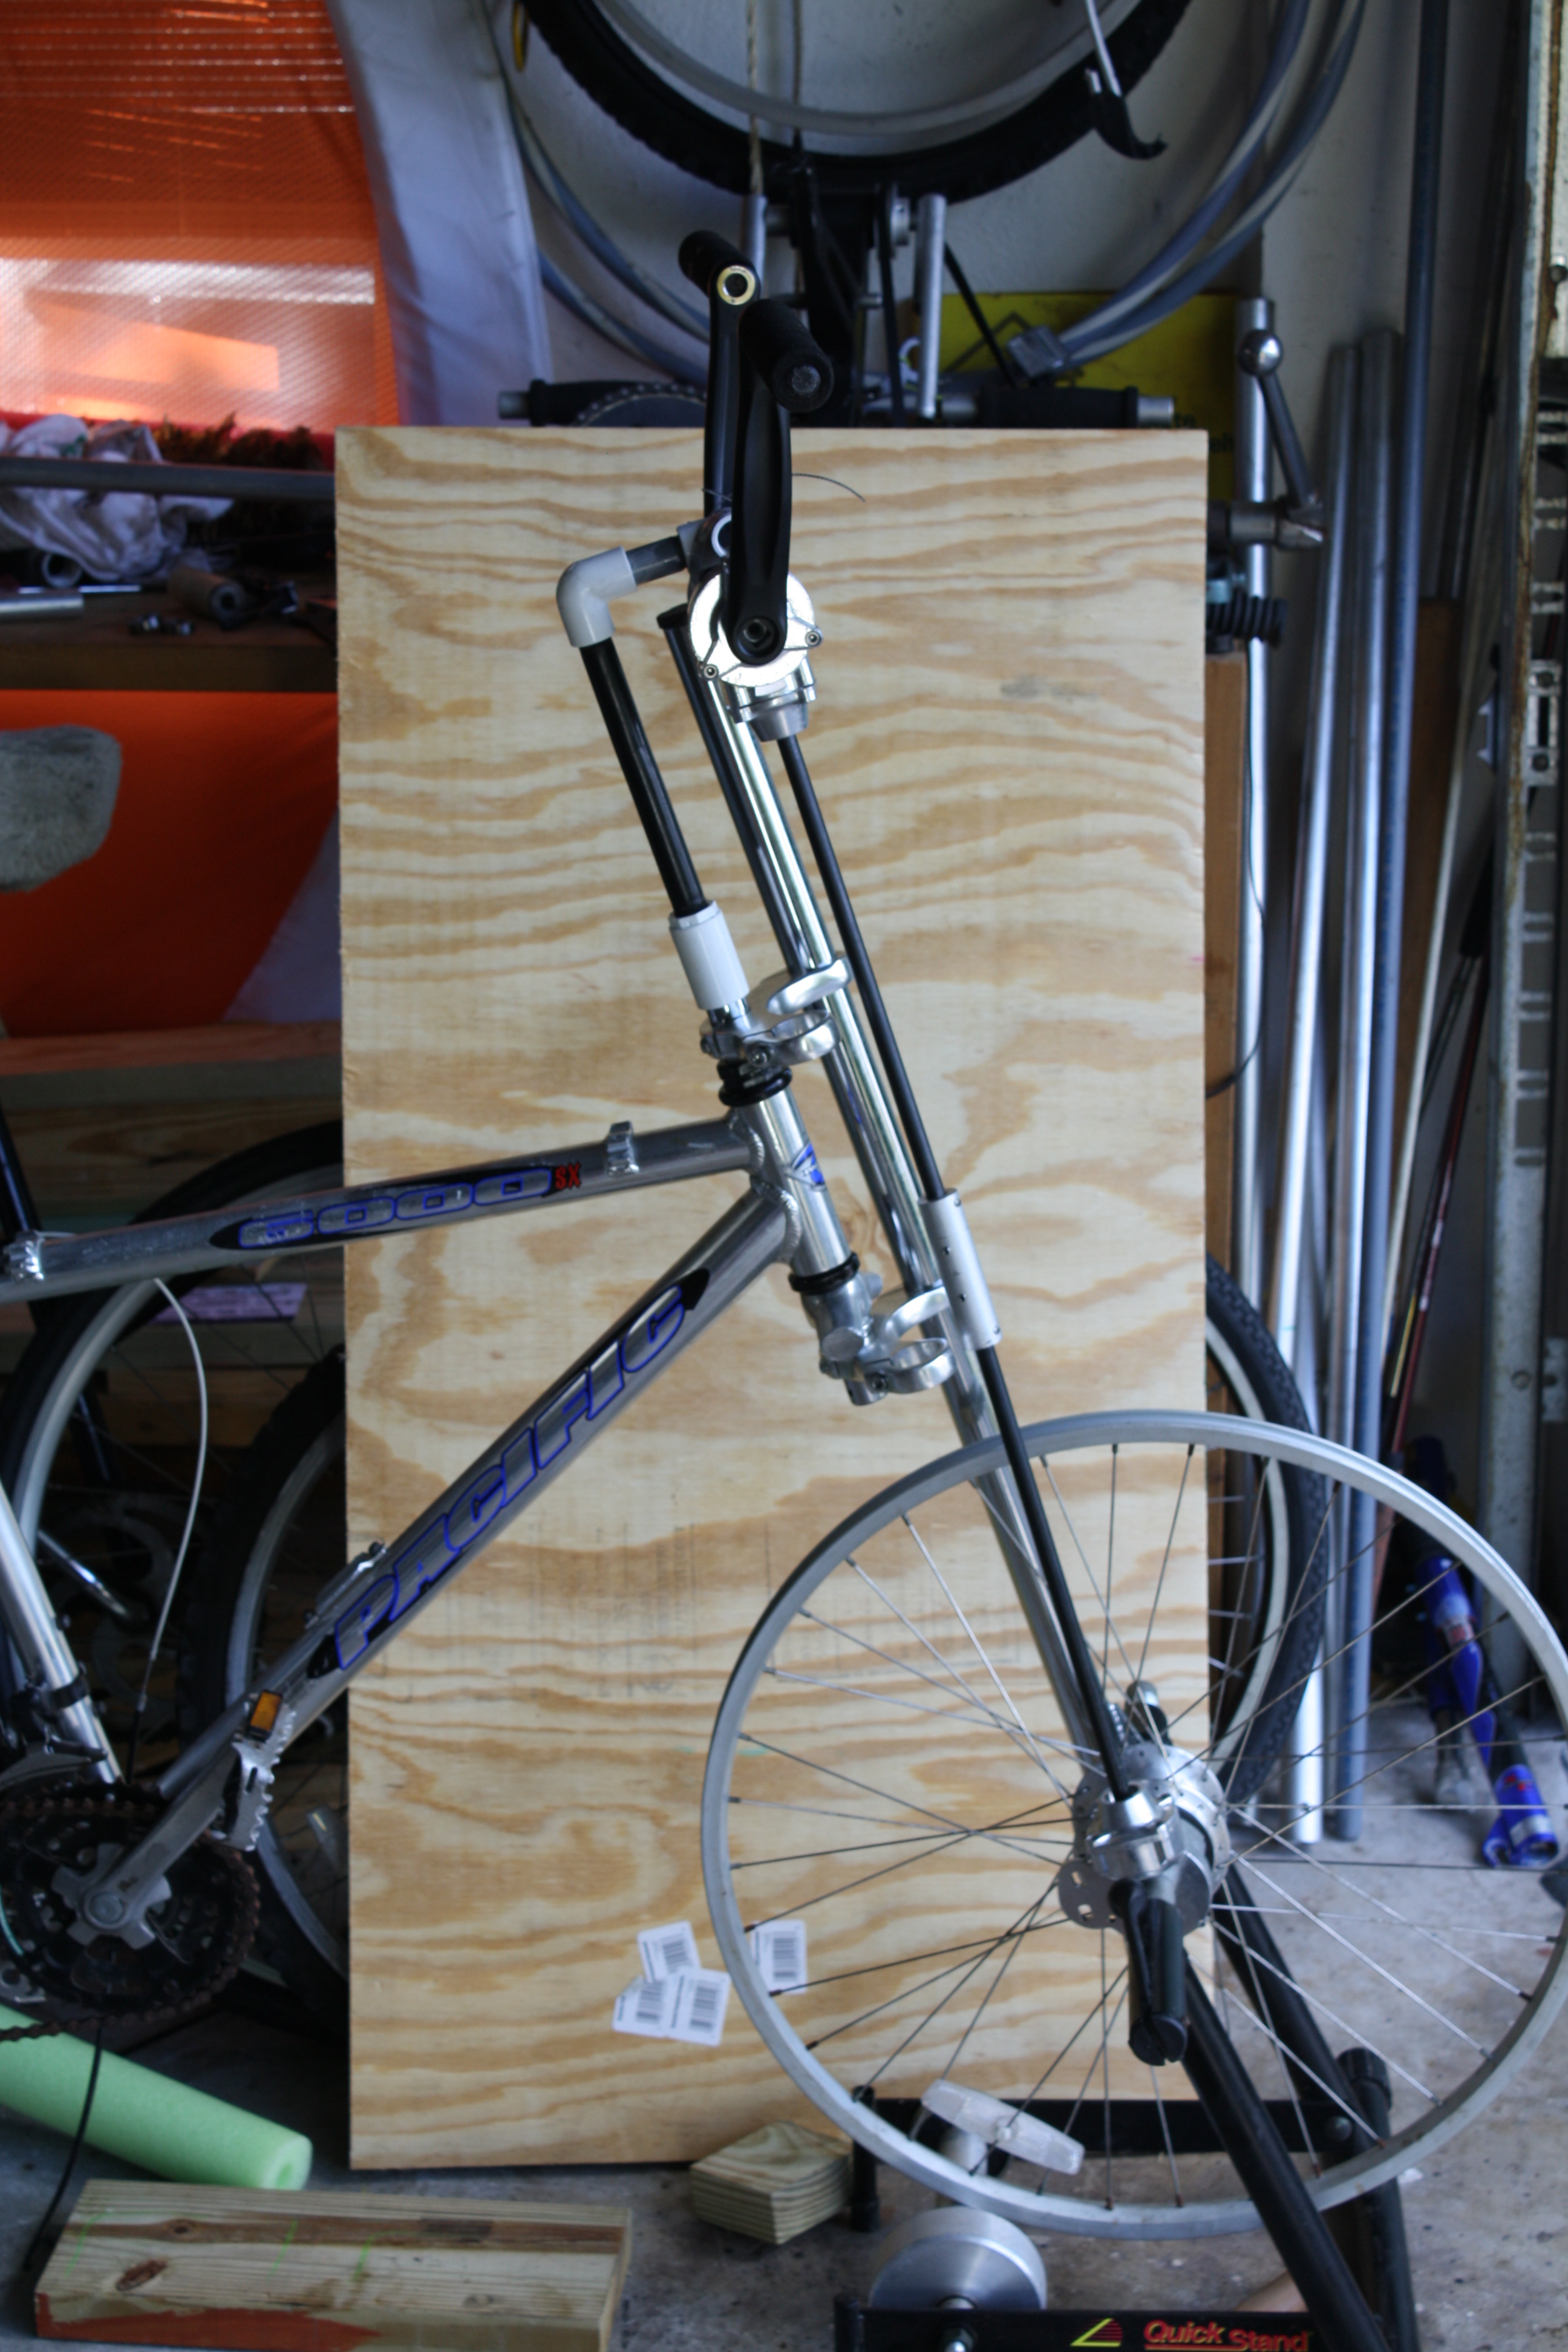 Dual Drive bicycle early stage development